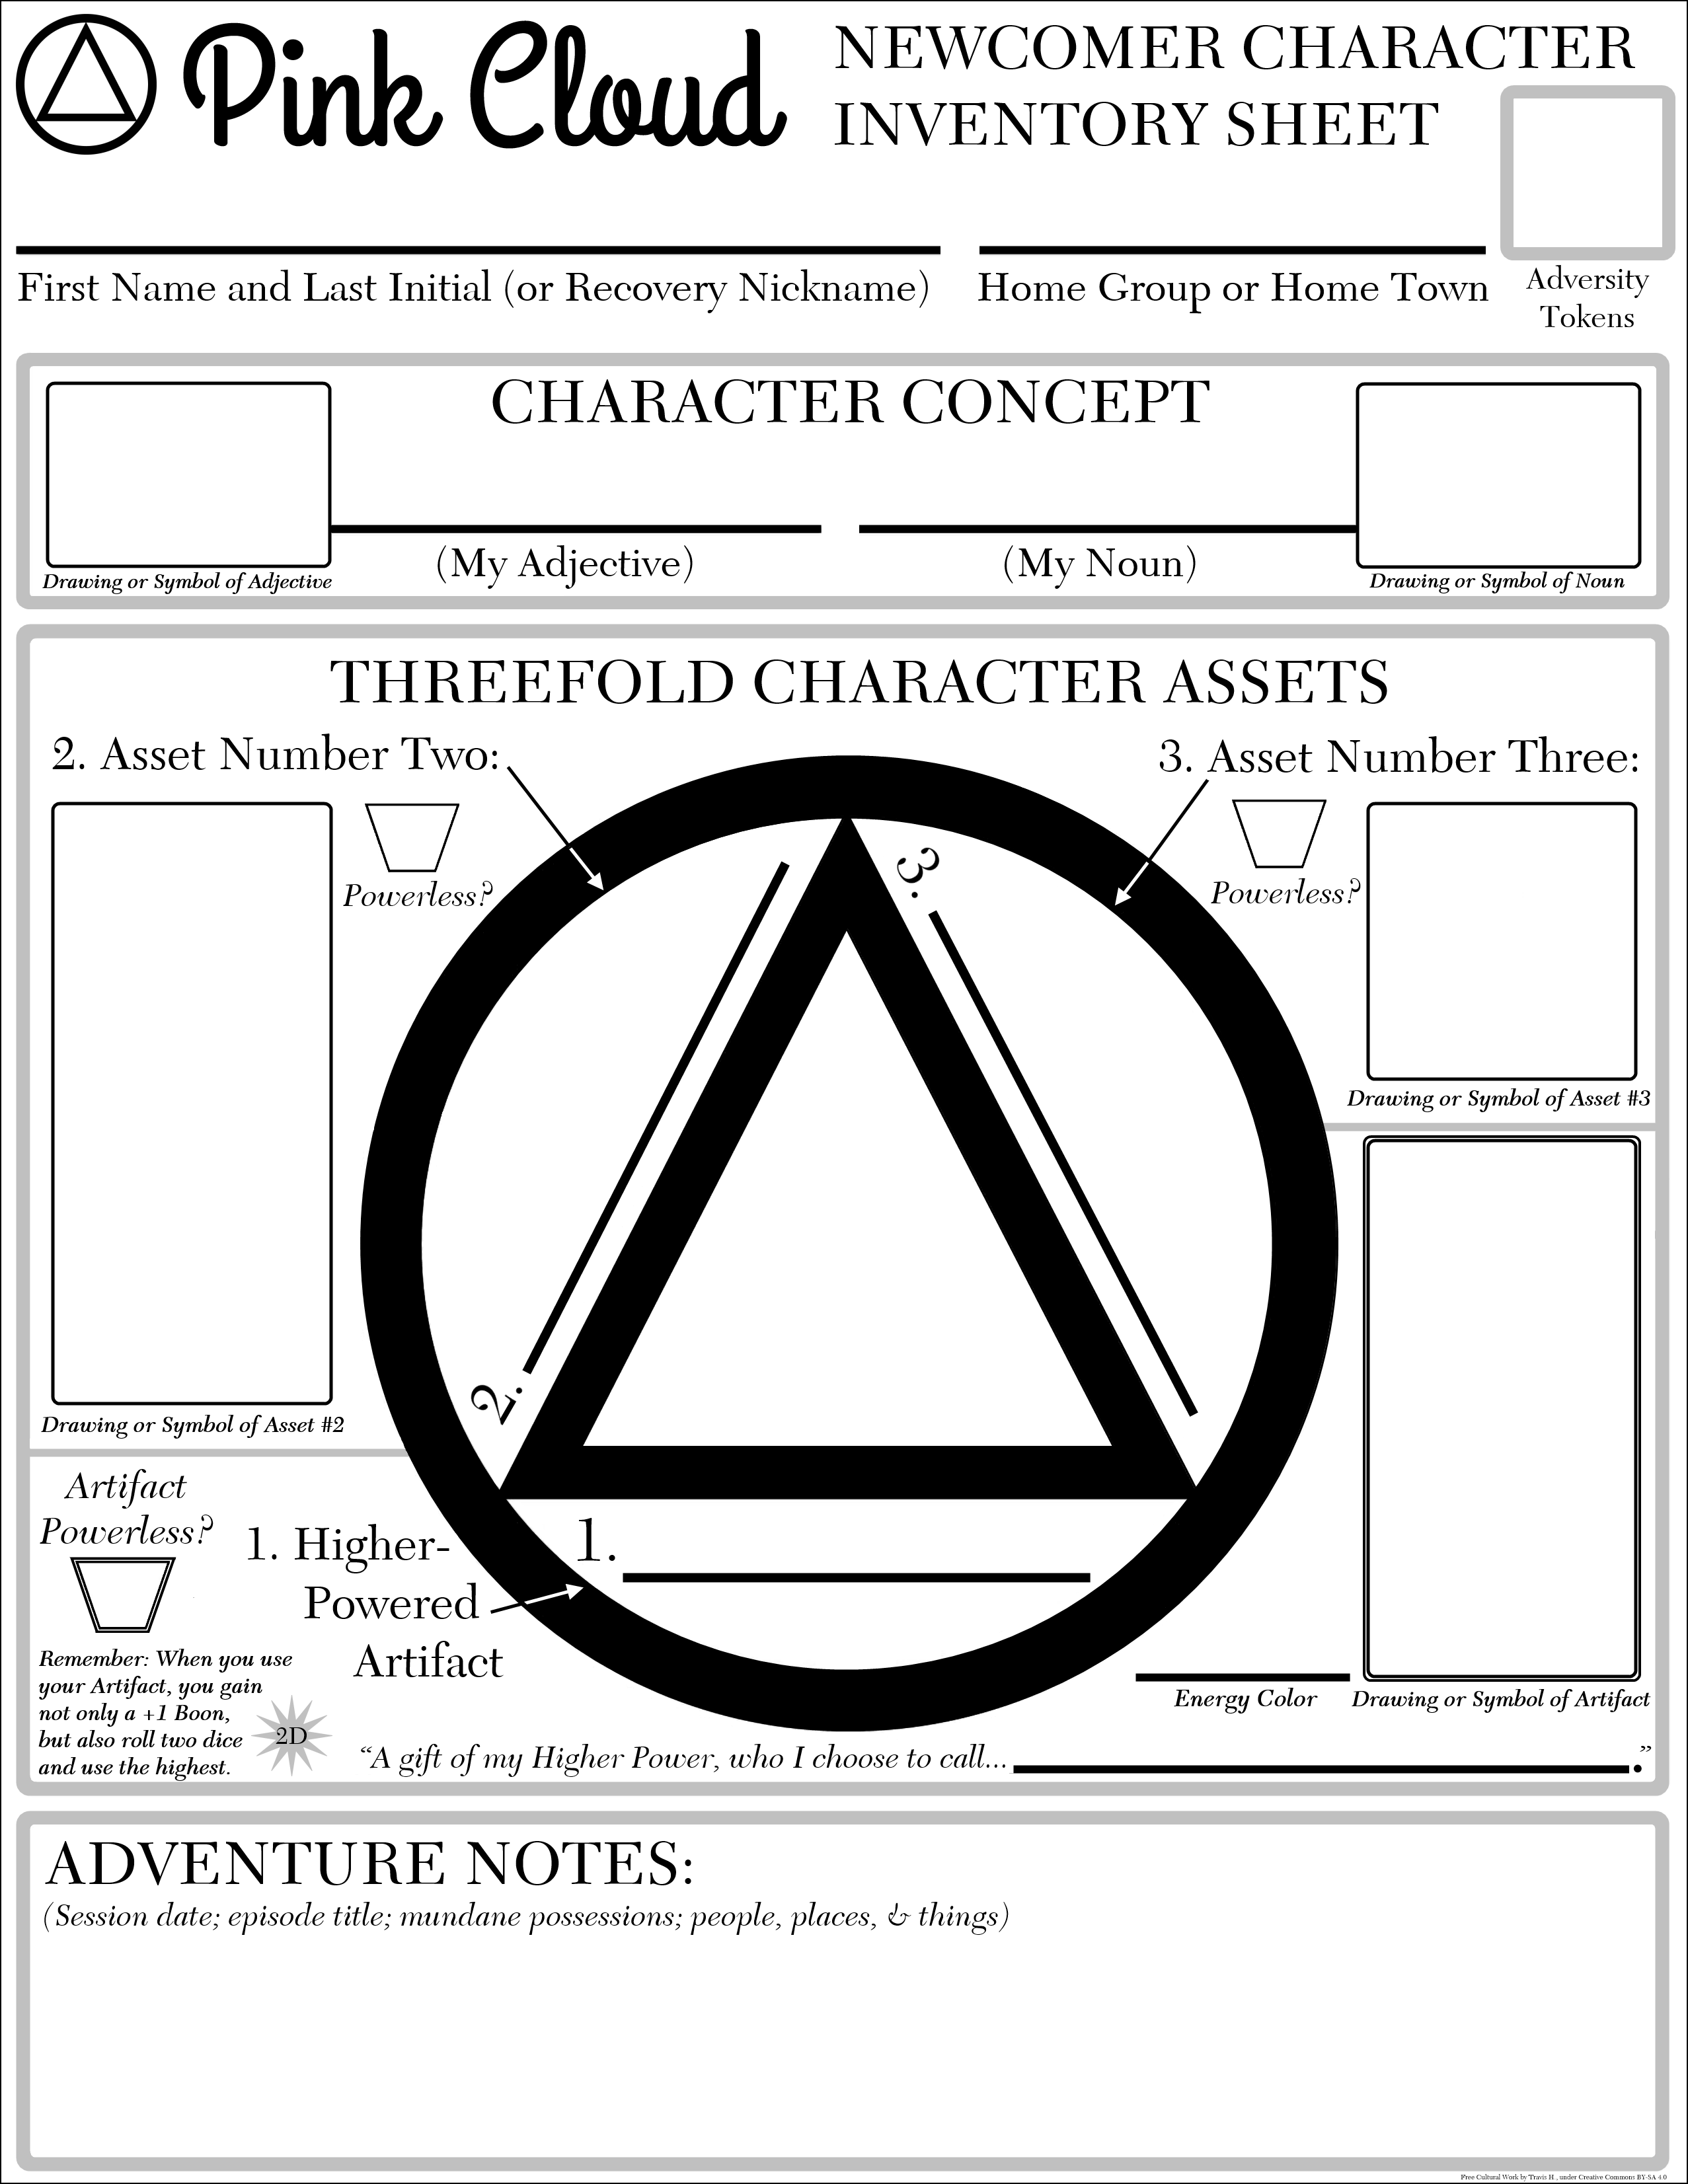 outline for KS - Pink Cloud Newcomer Character Inventory Sheet 4.2.png